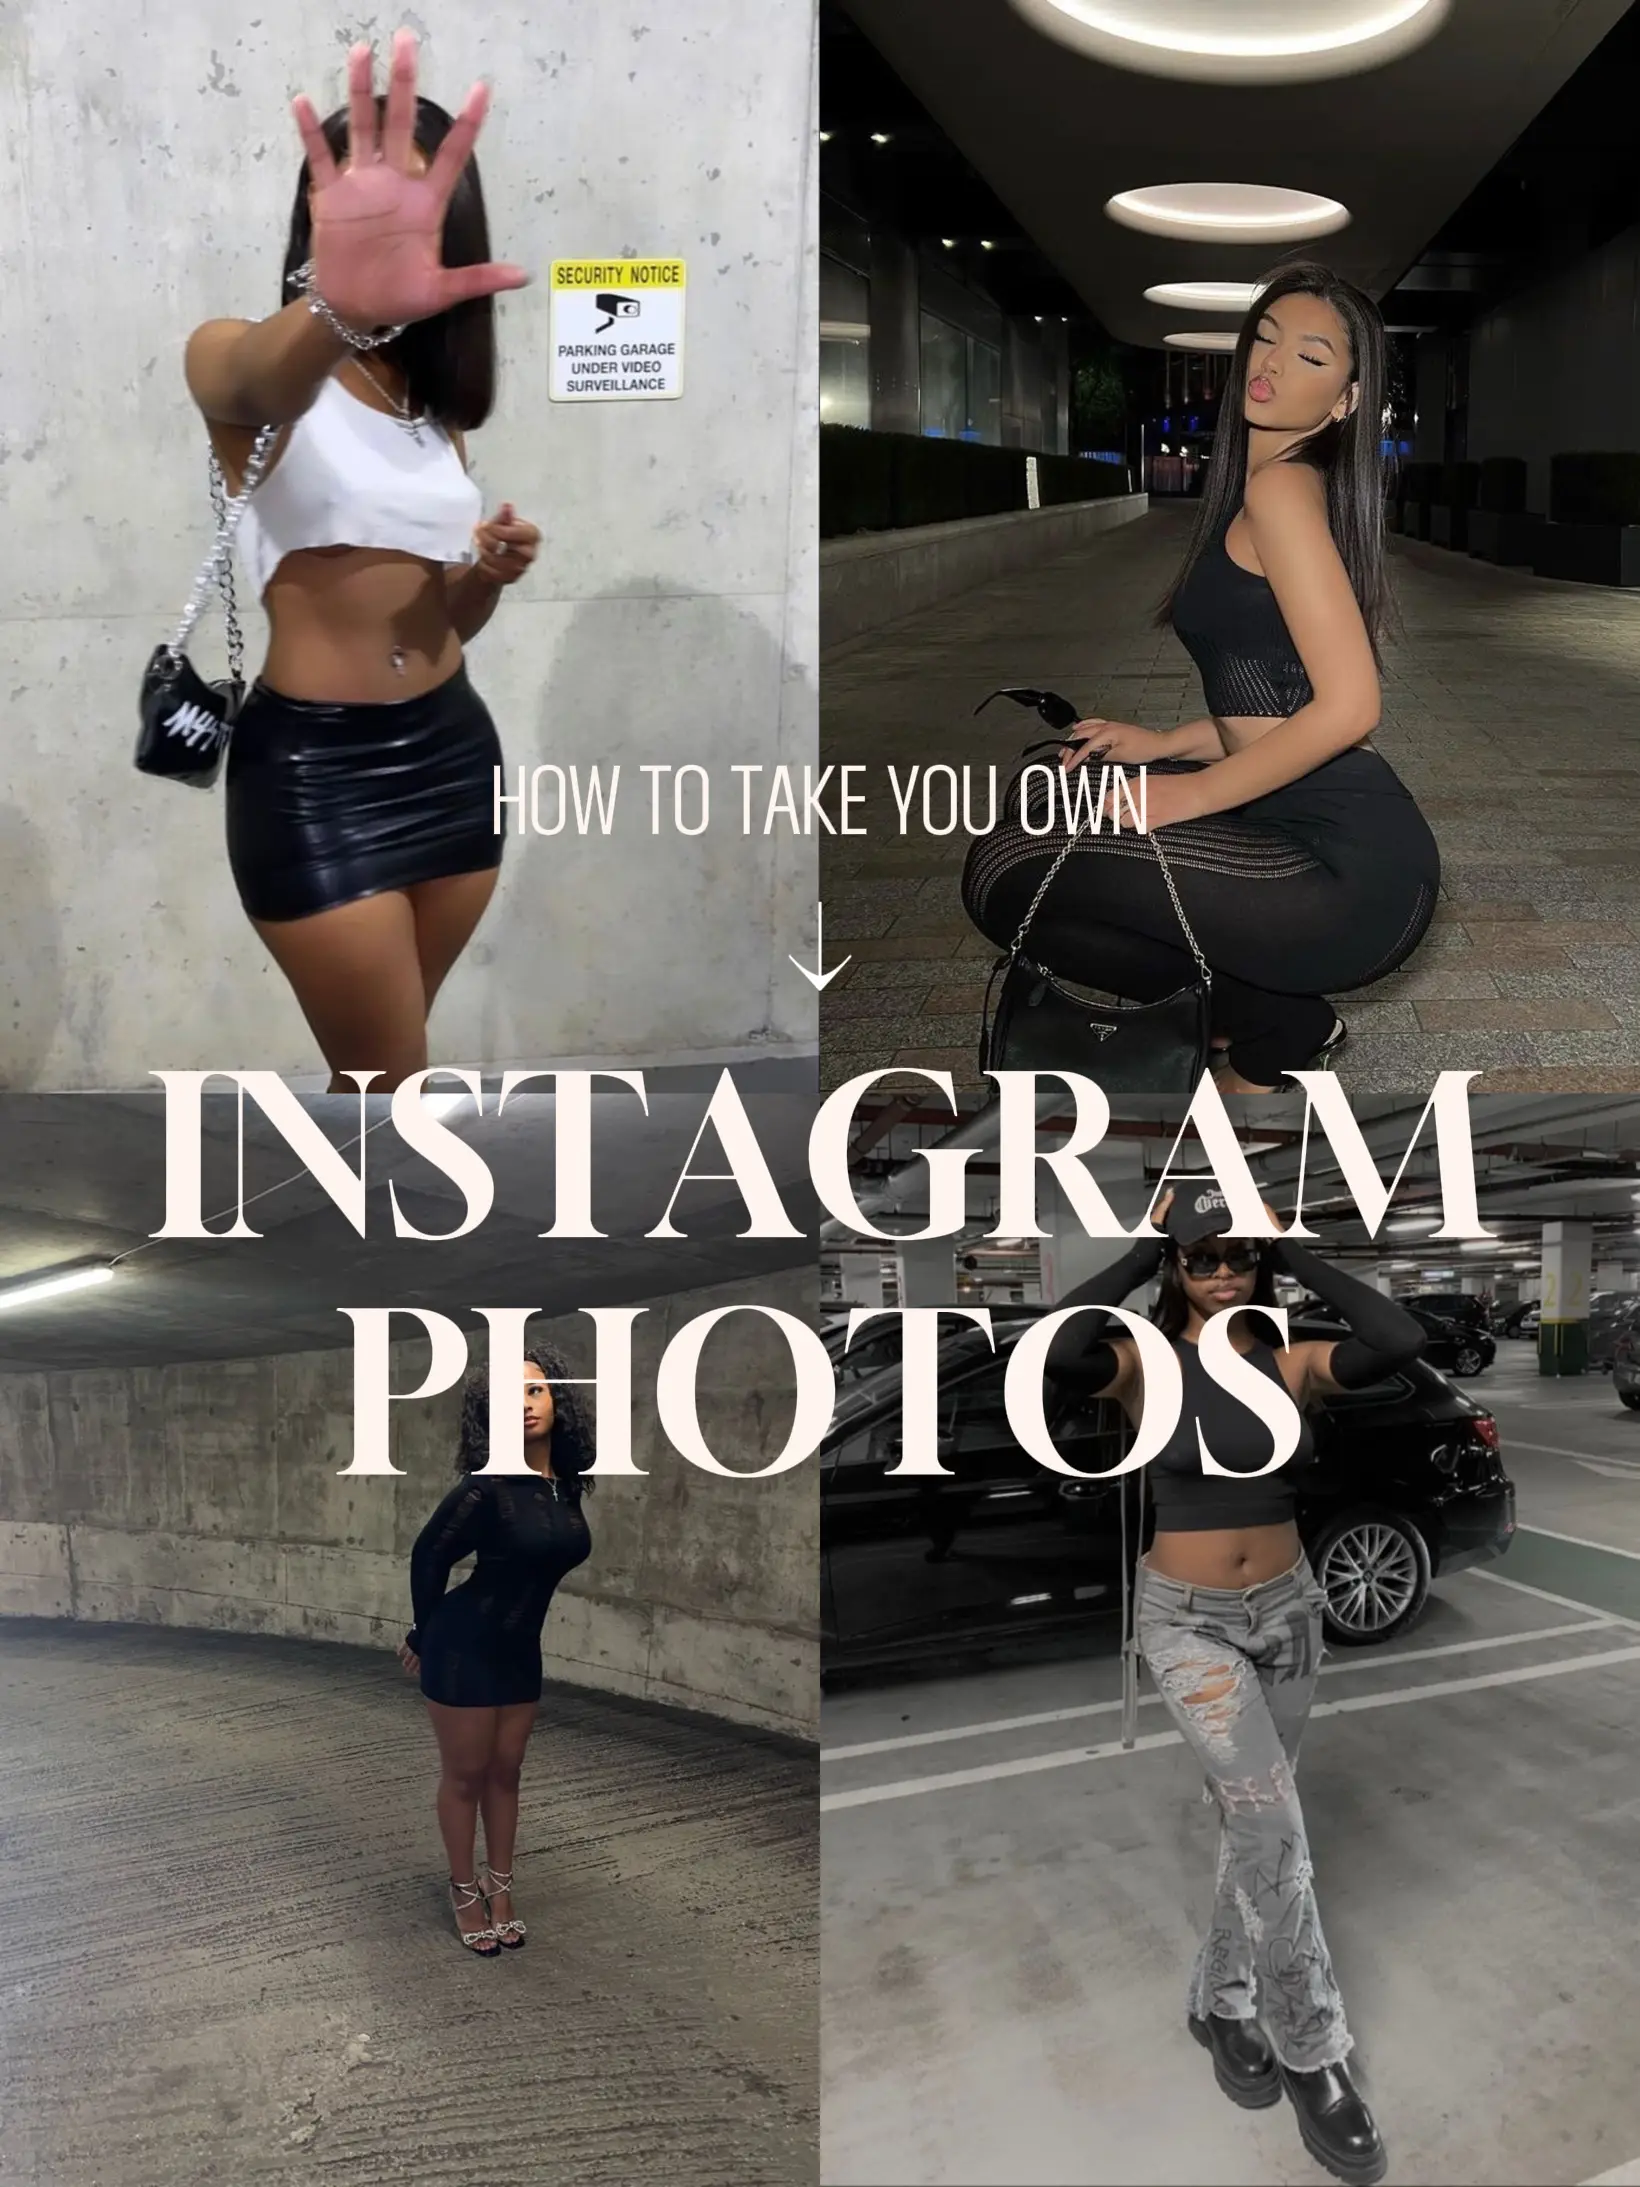 How to Take Your Own Instagram Photos's images